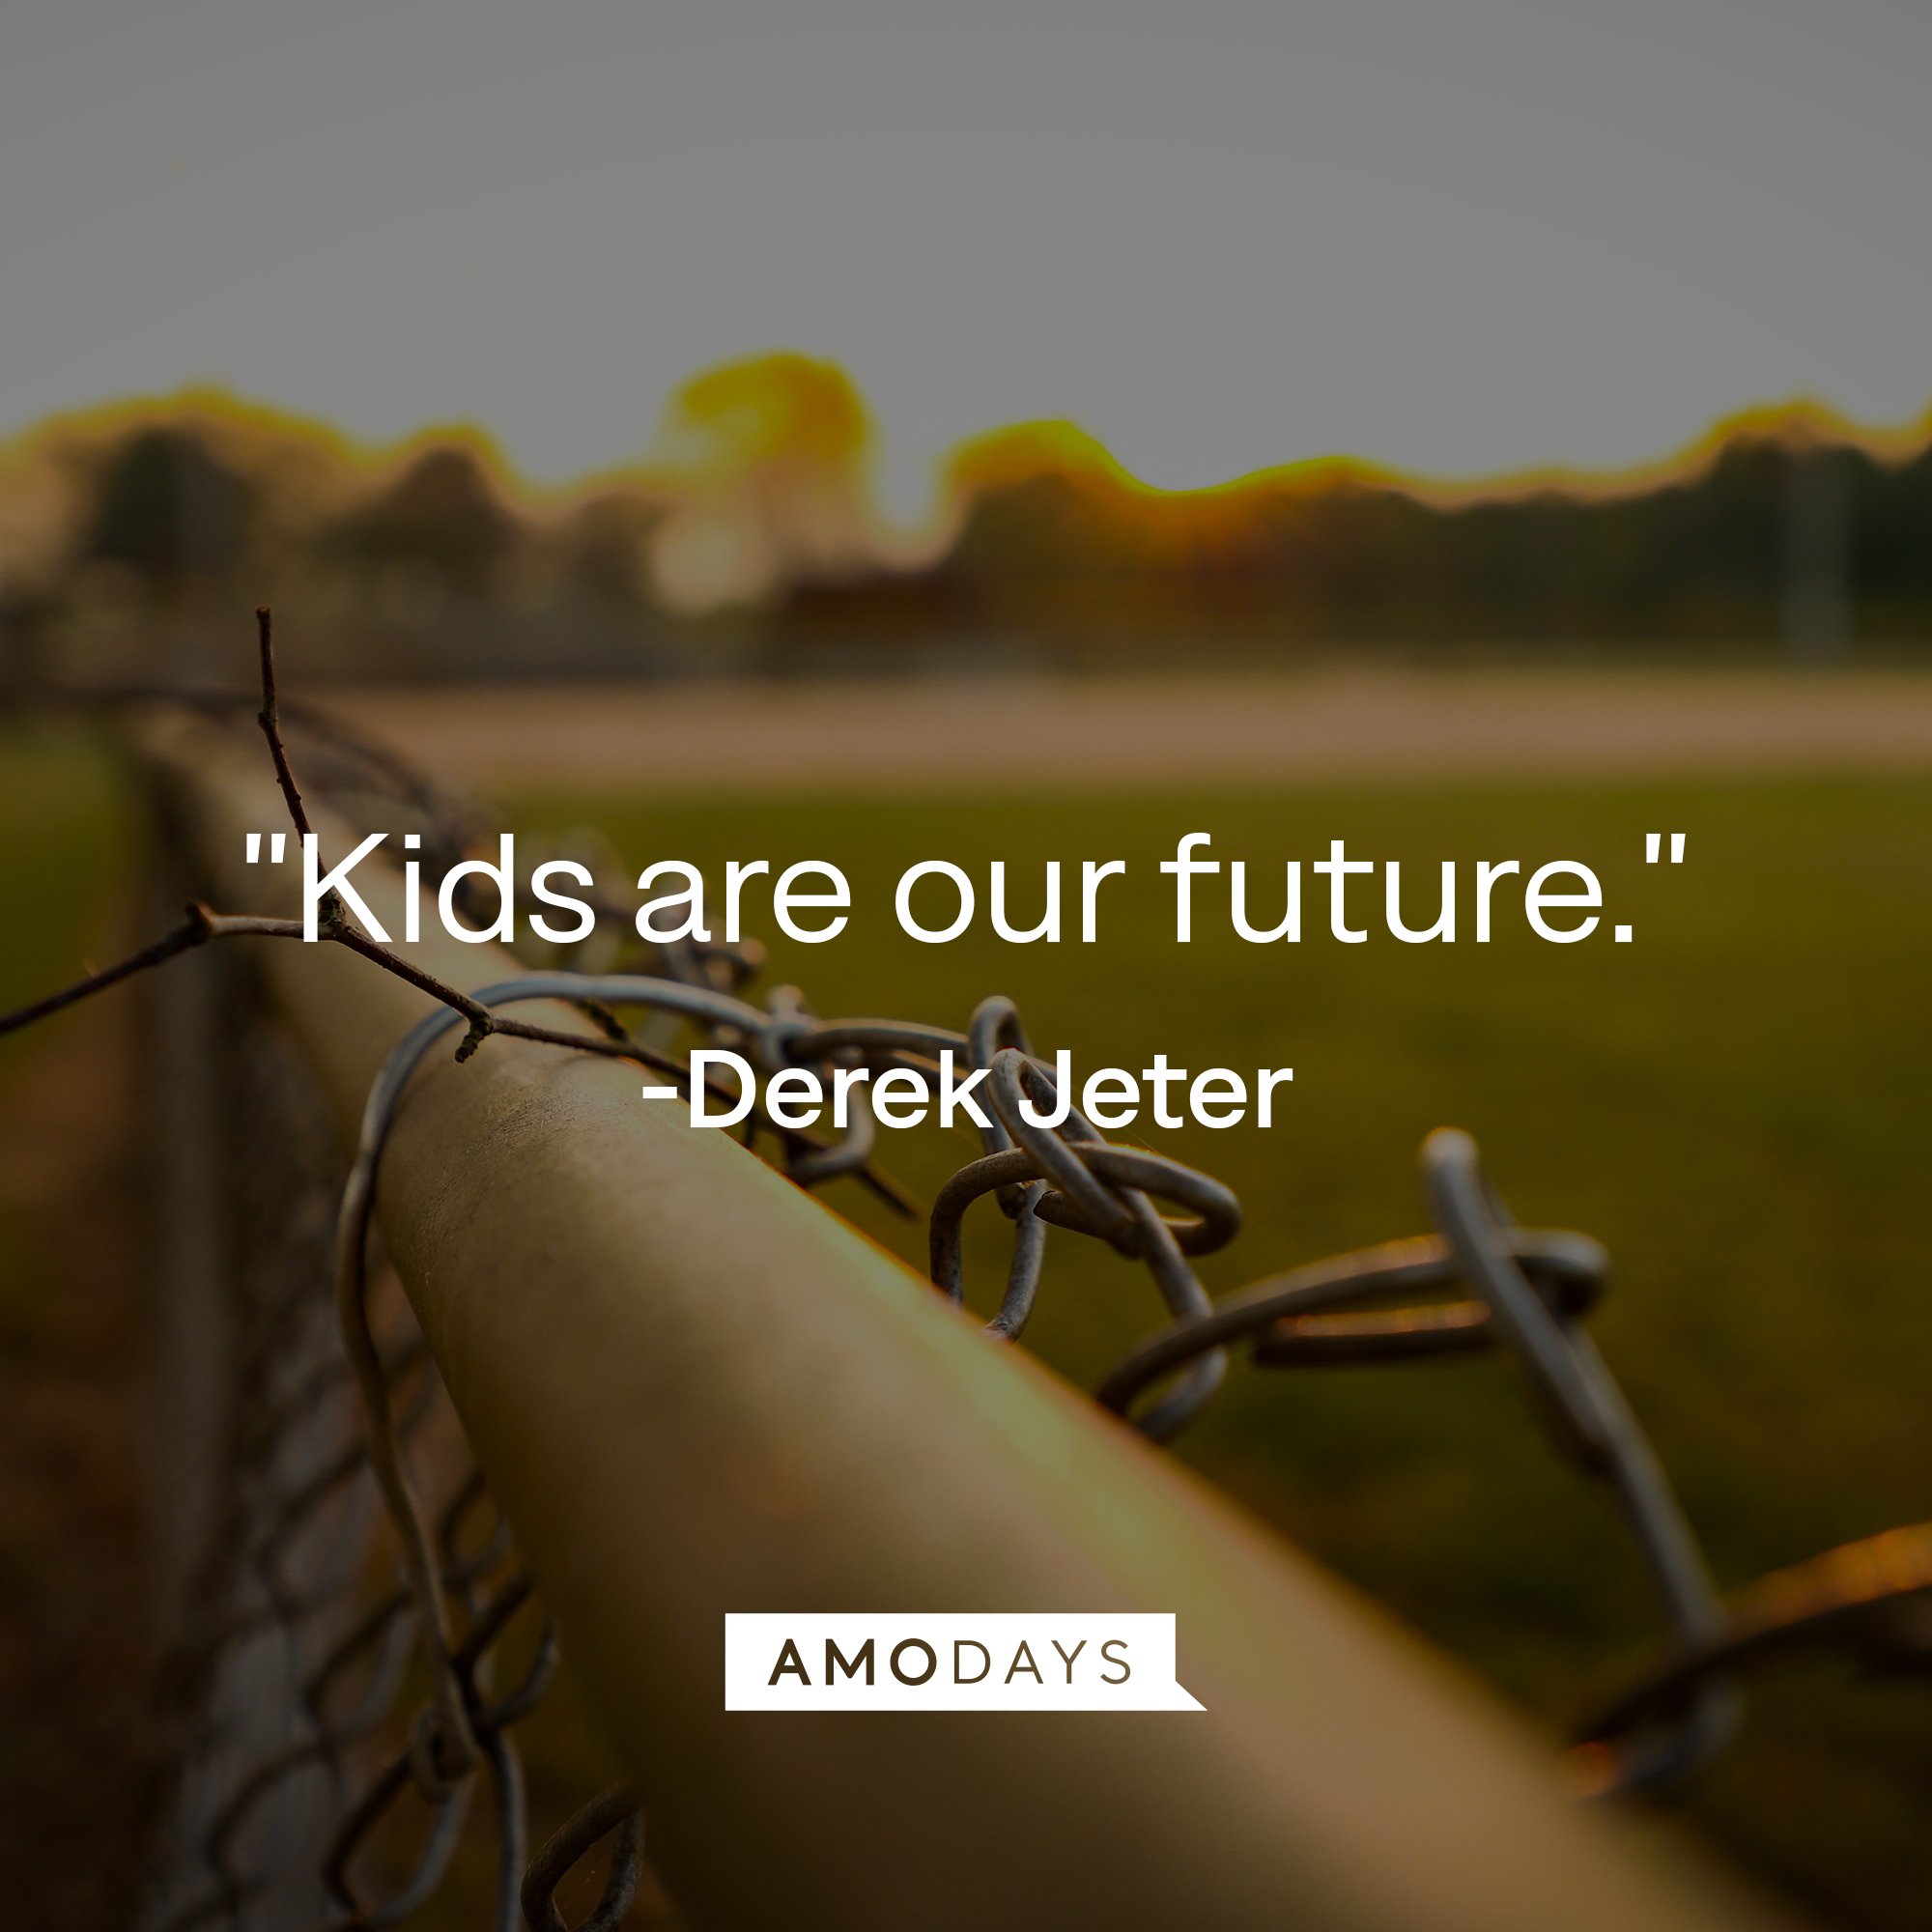 Derek Jeter's quote: "Kids are our future." | Image: AmoDays